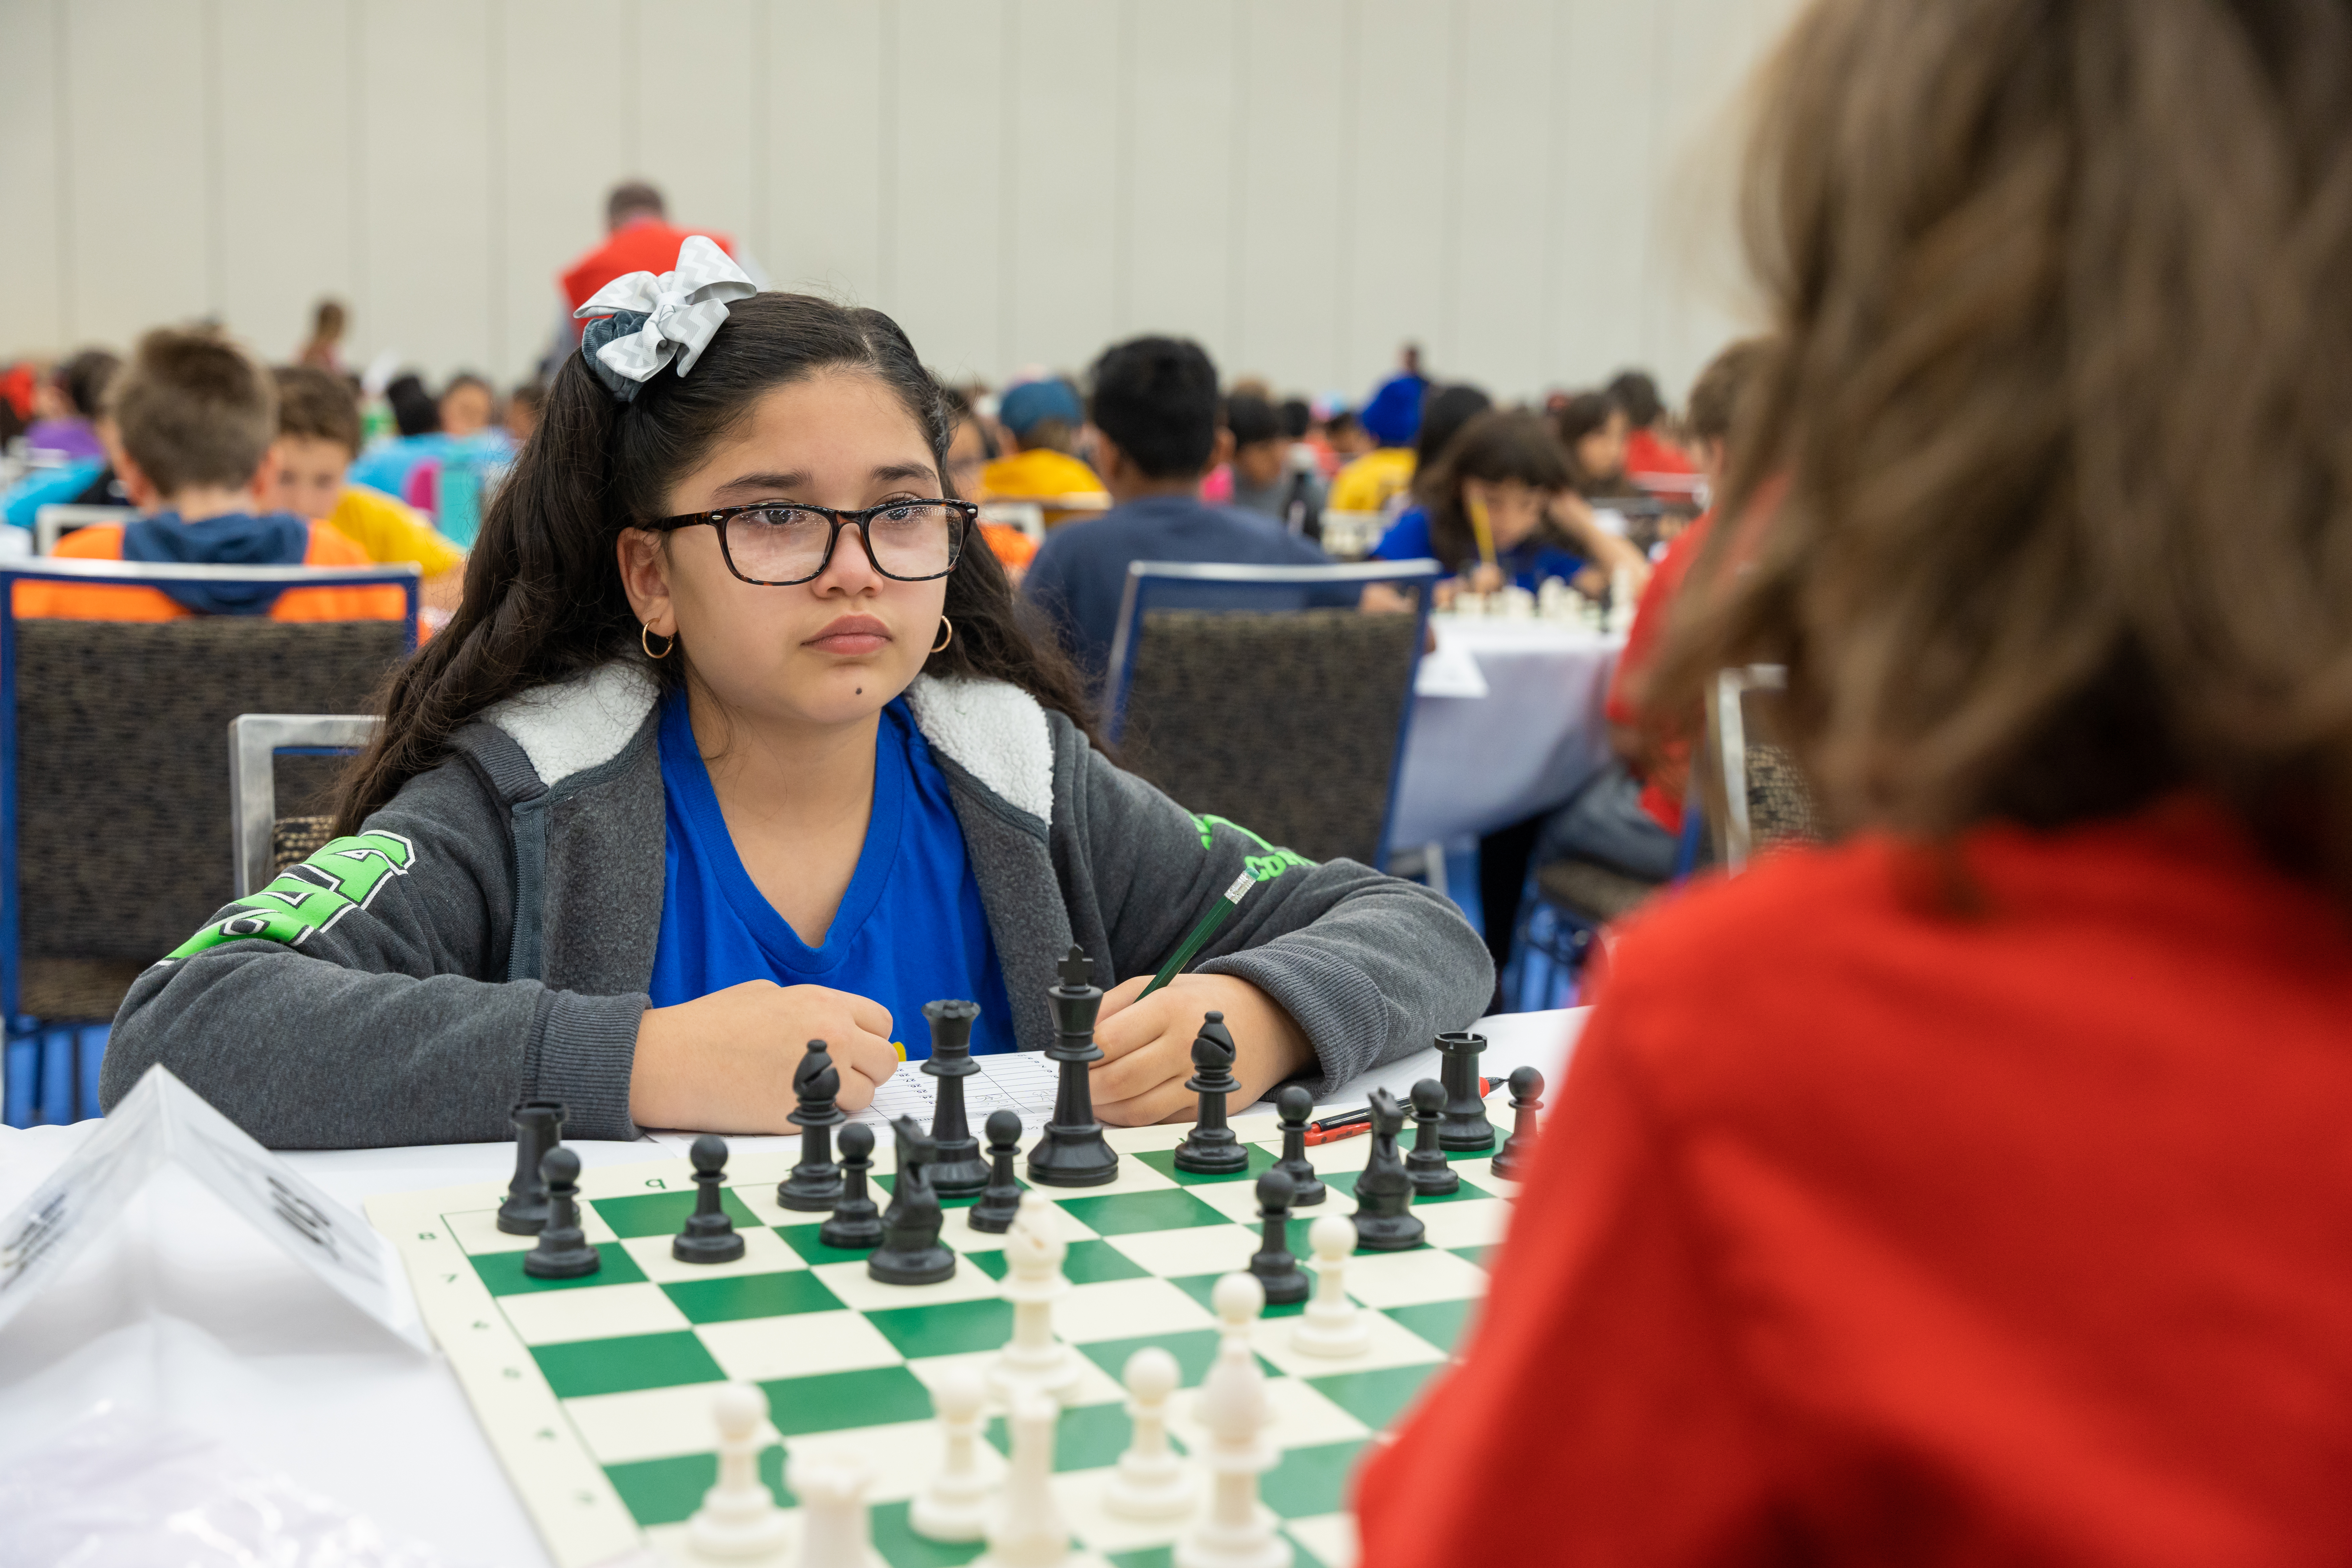 College chess clashes at U.S. Open - SparkChess